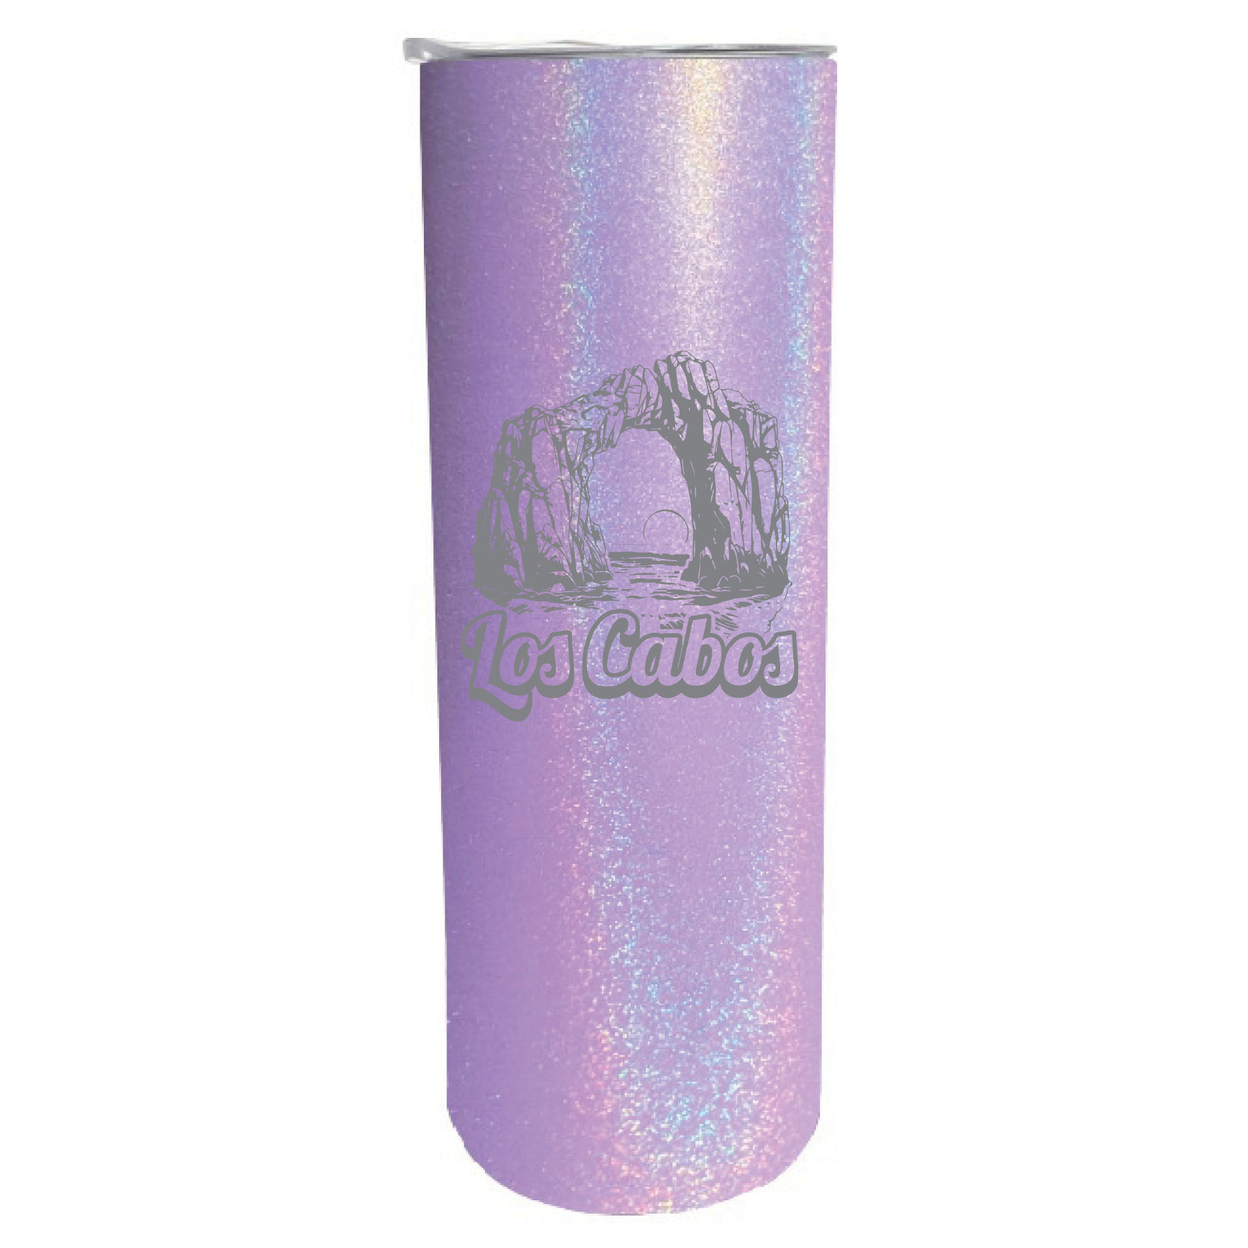 Los Cabos Mexico Souvenir 20 Oz Engraved Insulated Stainless Steel Skinny Tumbler - Navy,,4-Pack